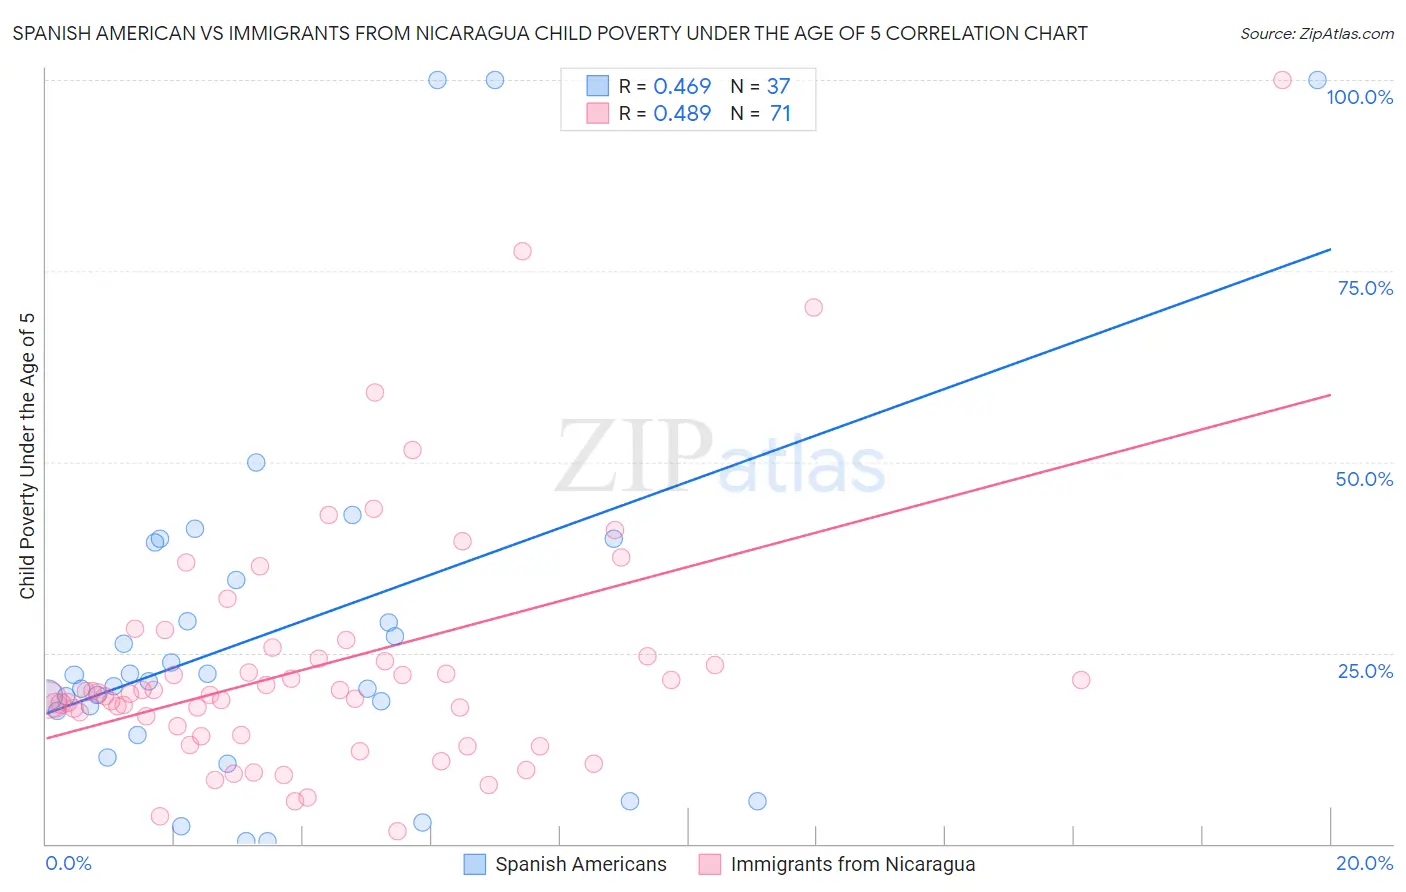 Spanish American vs Immigrants from Nicaragua Child Poverty Under the Age of 5